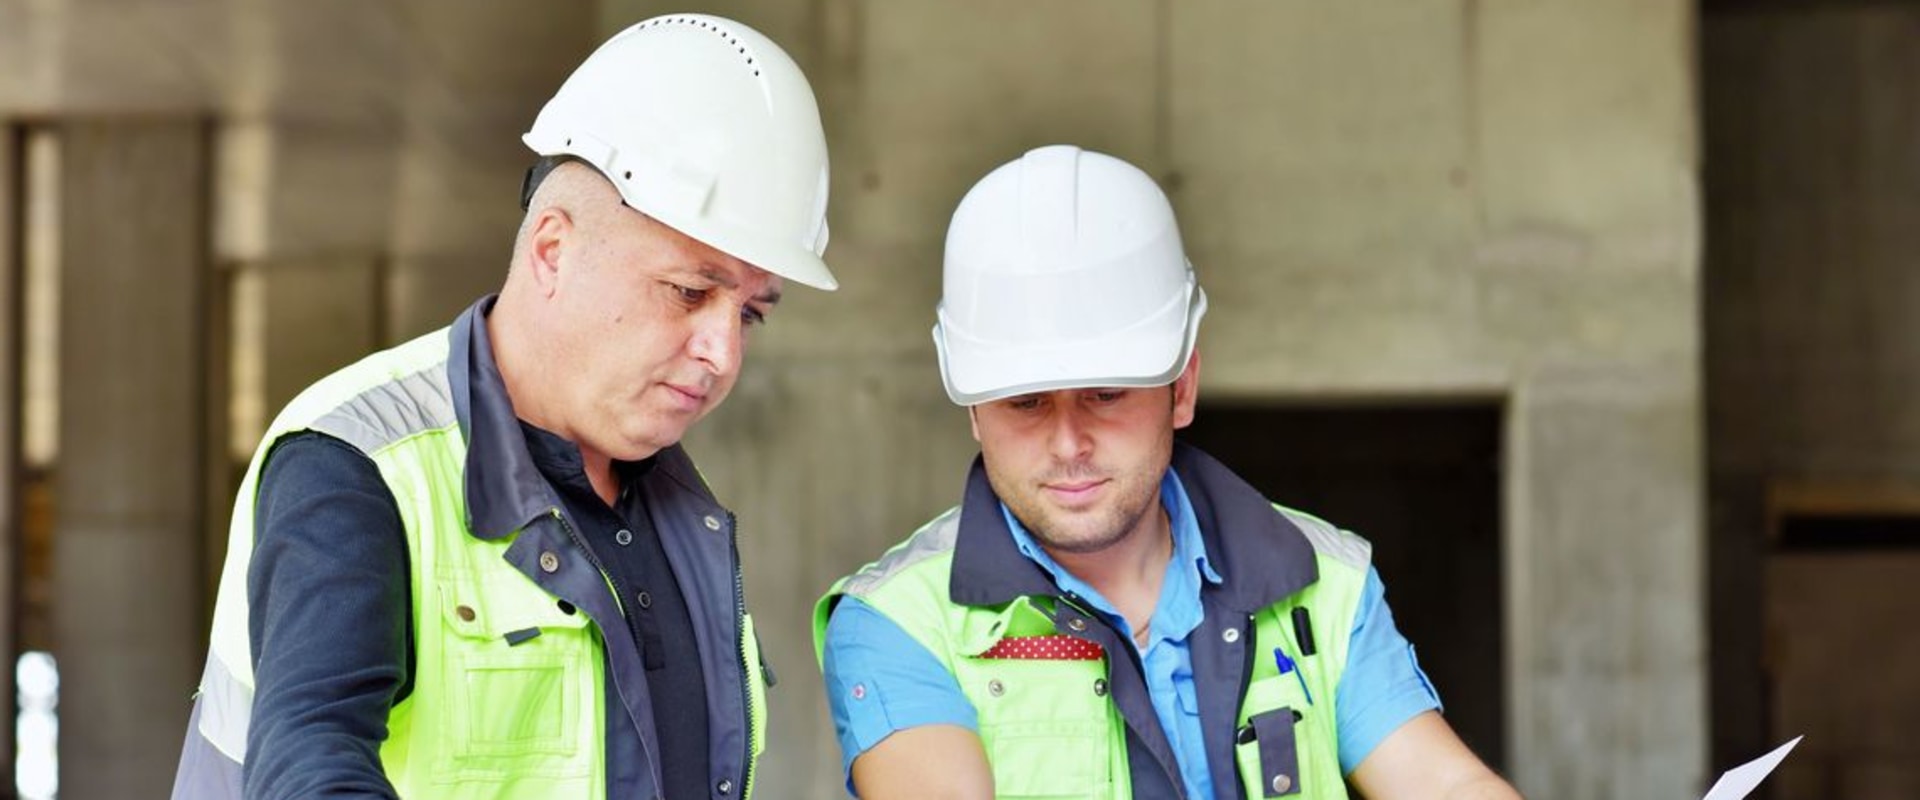 What skills does a construction engineer need?